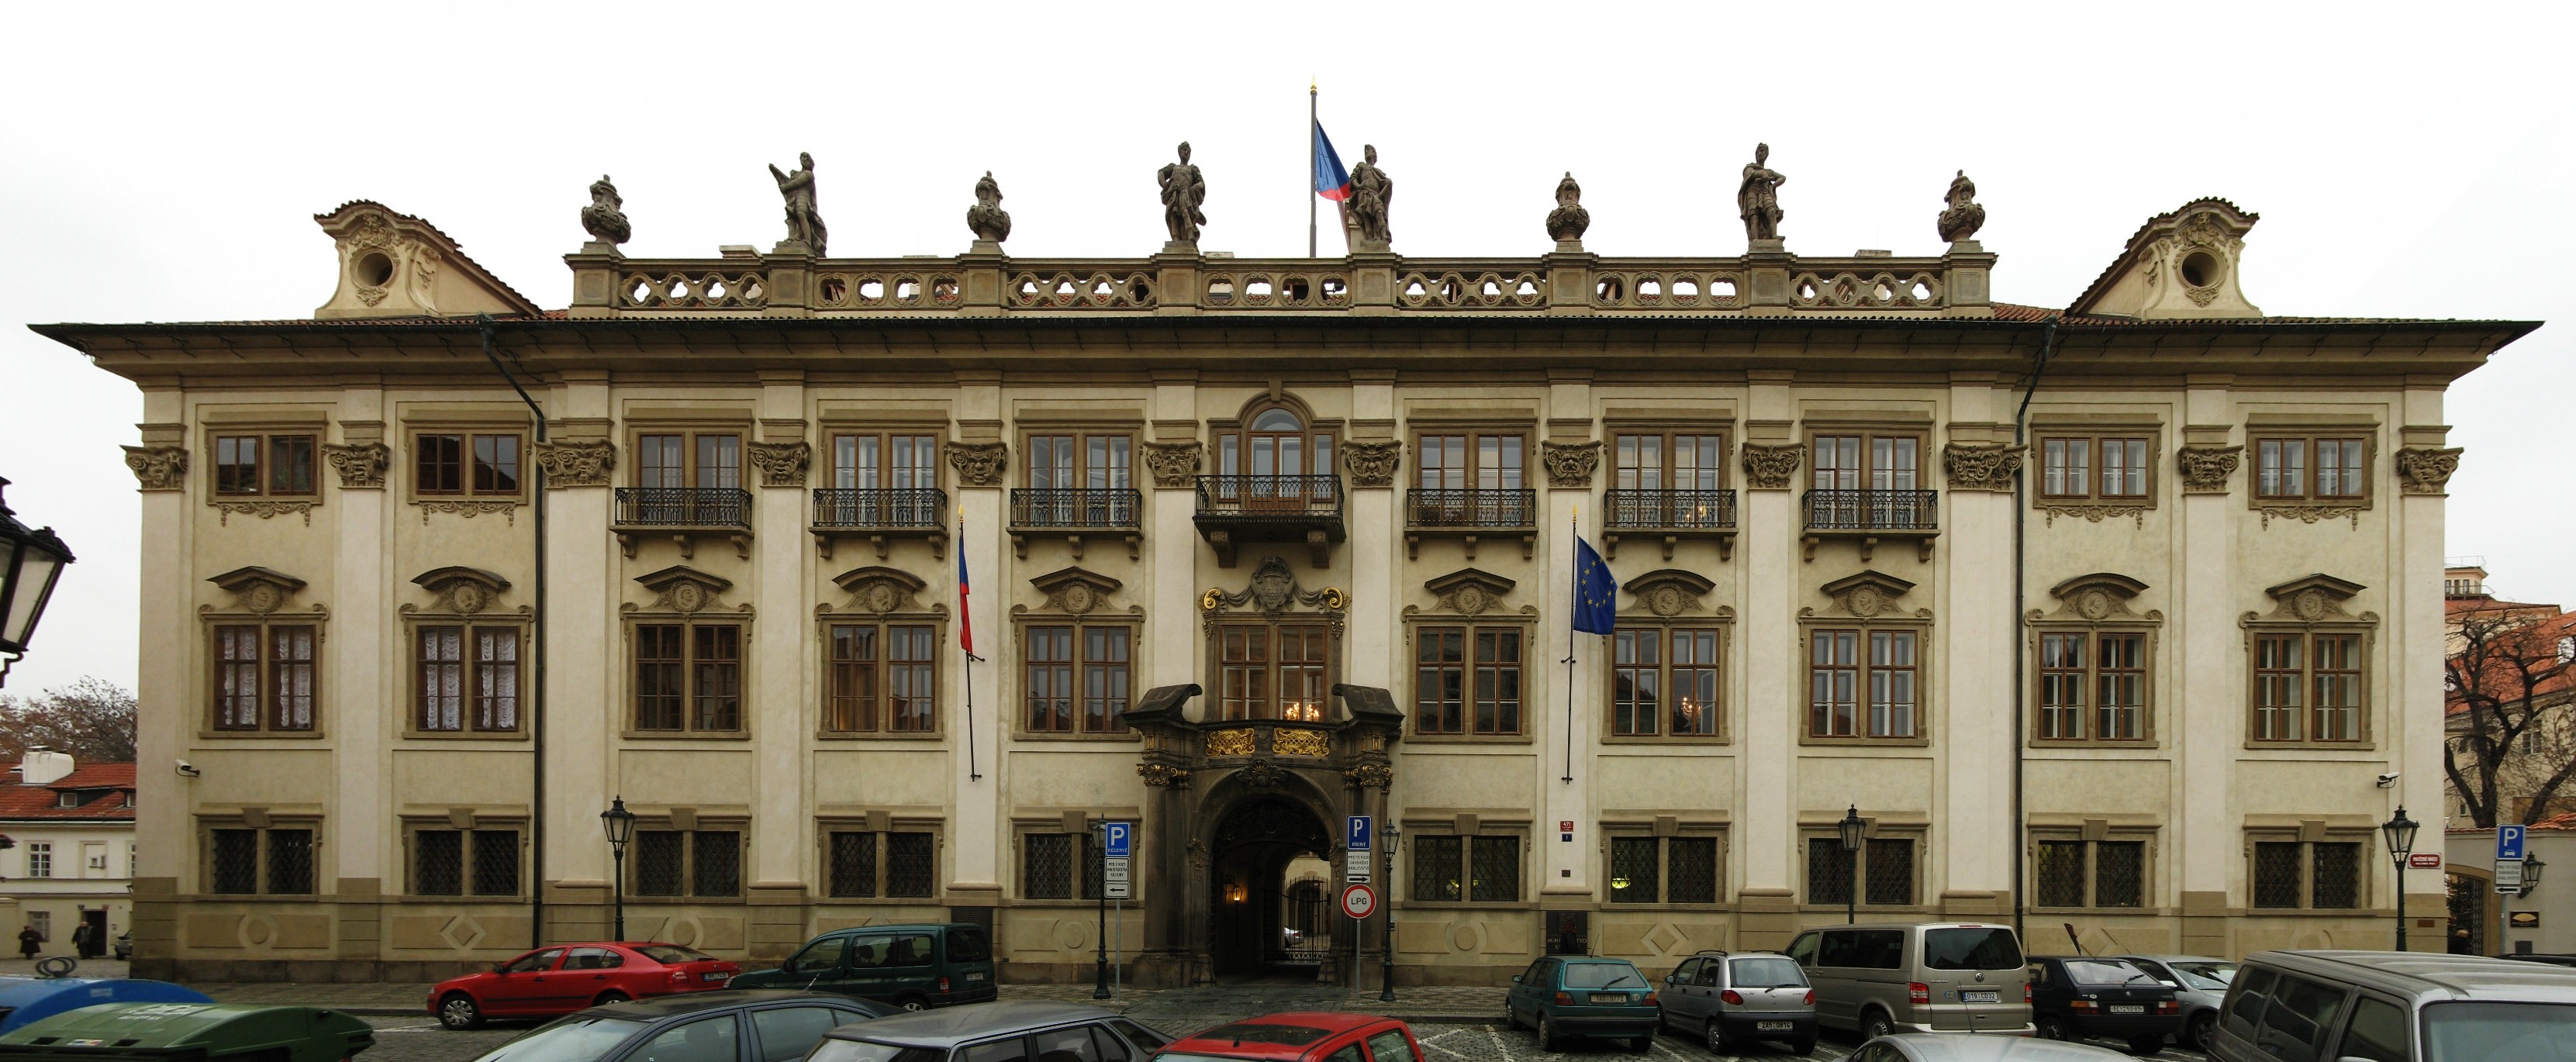 Nostic palace, Ministery od Culture of the Czech Republic